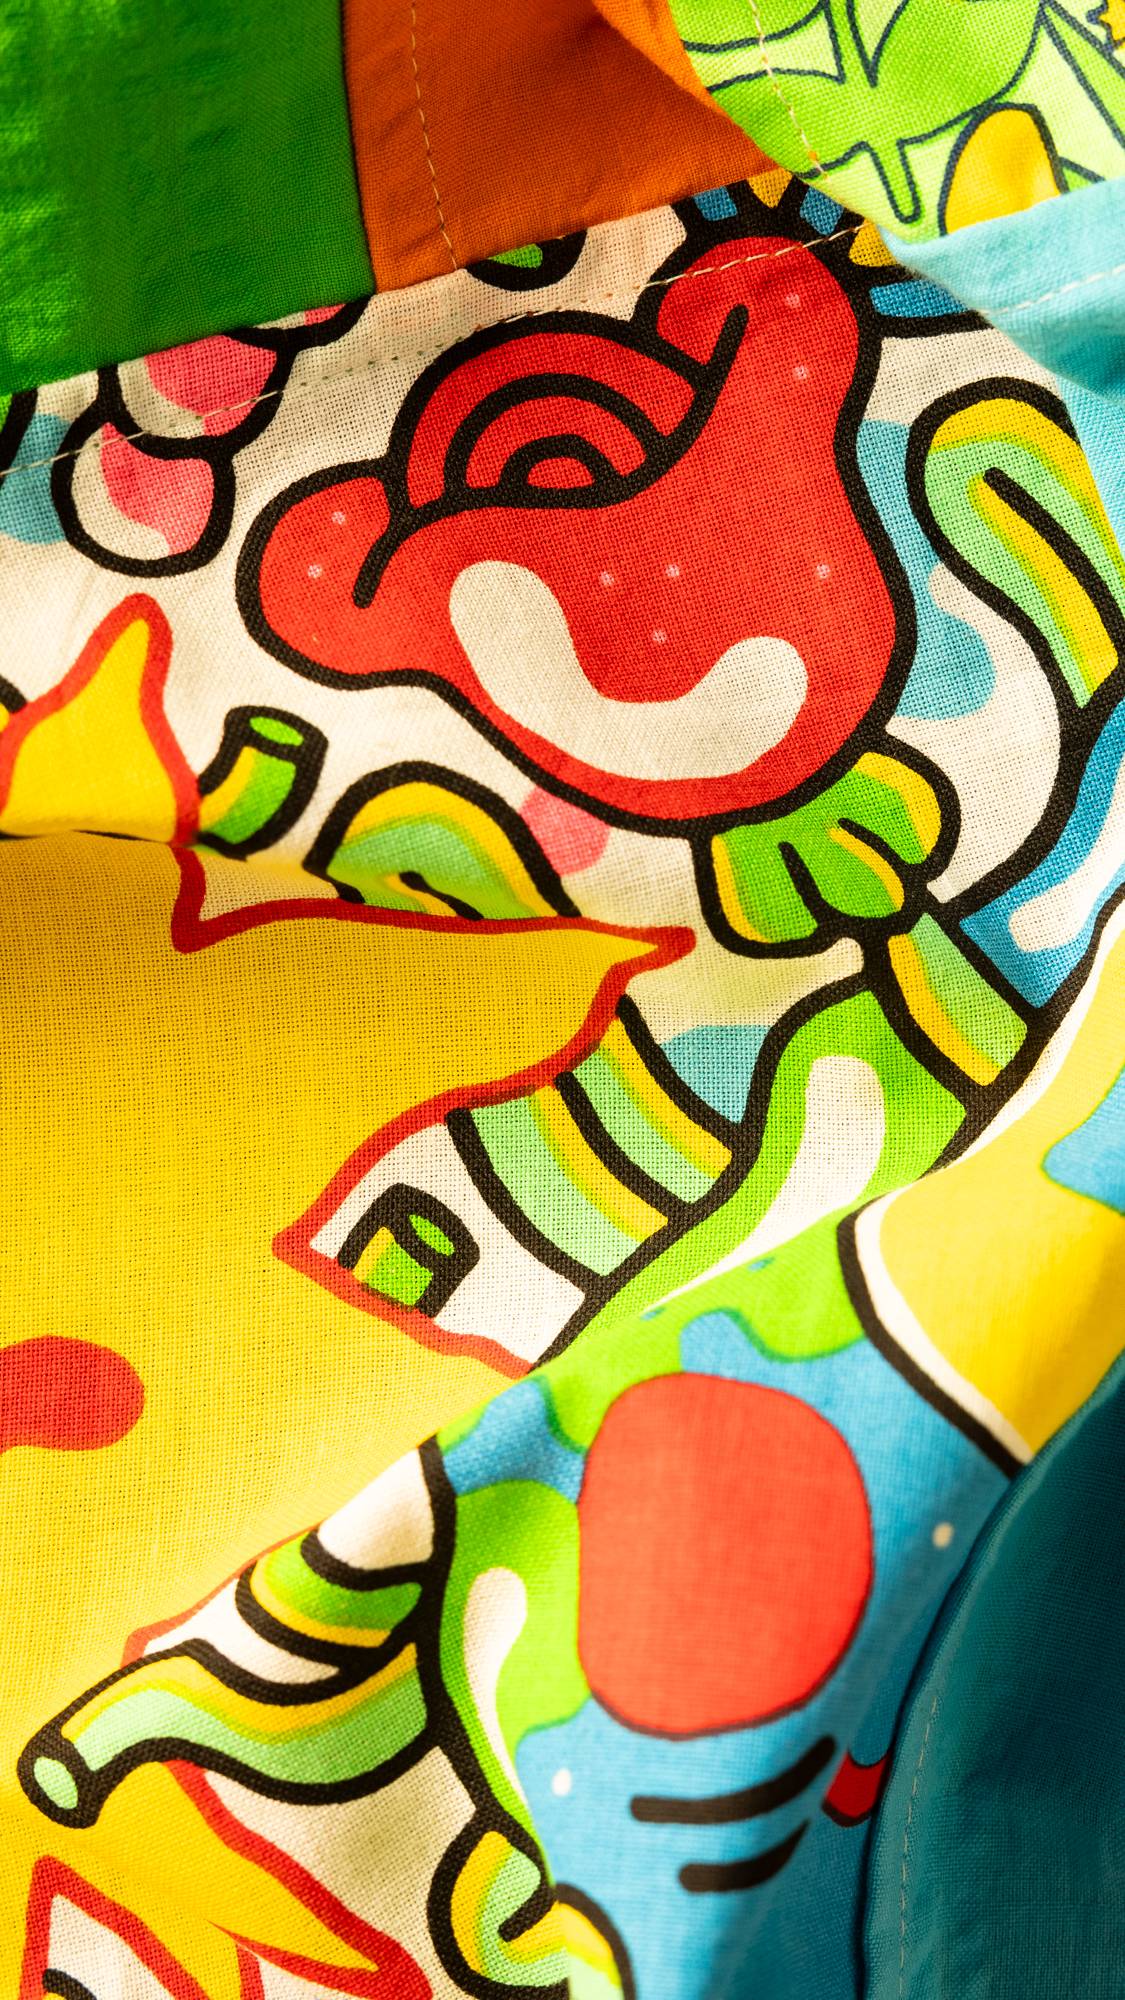 Image shows a super close-up of the Jobakbo knot wrap focusing on a large, red, illustrated rose with pops of colour.